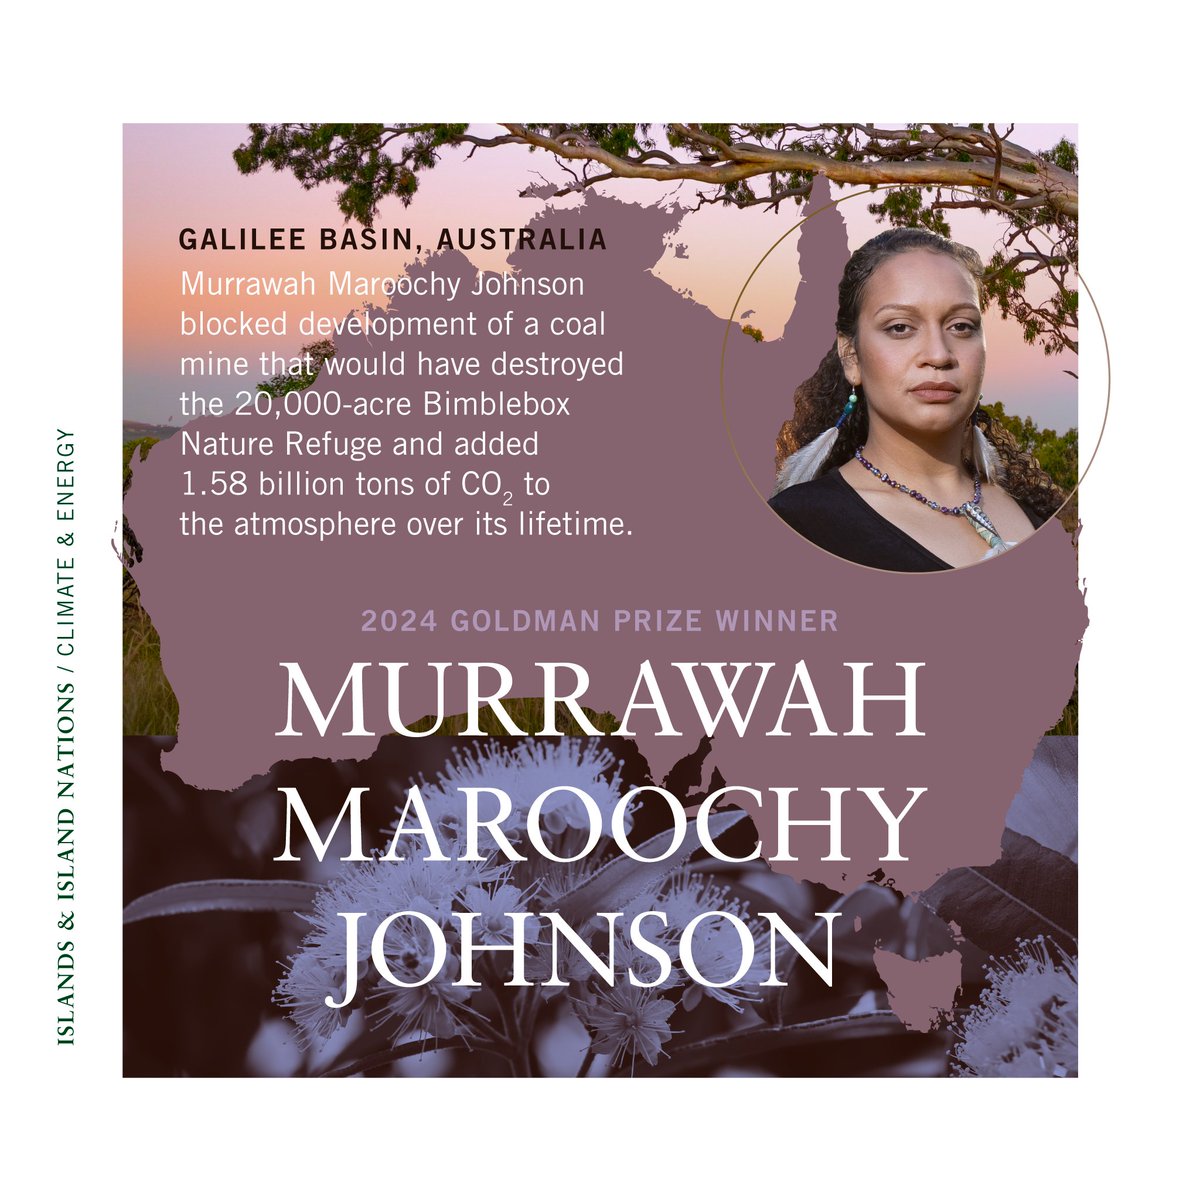 Murrawah Maroochy Johnson blocked development of a coal mine that would have destroyed the 20,000-acre Bimblebox Nature Refuge in Queensland, Australia, and added 1.58 billion tons of CO2 to the atmosphere. #GoldmanPrize 🌎🏆 👉 Learn more: bit.ly/3Whtygk